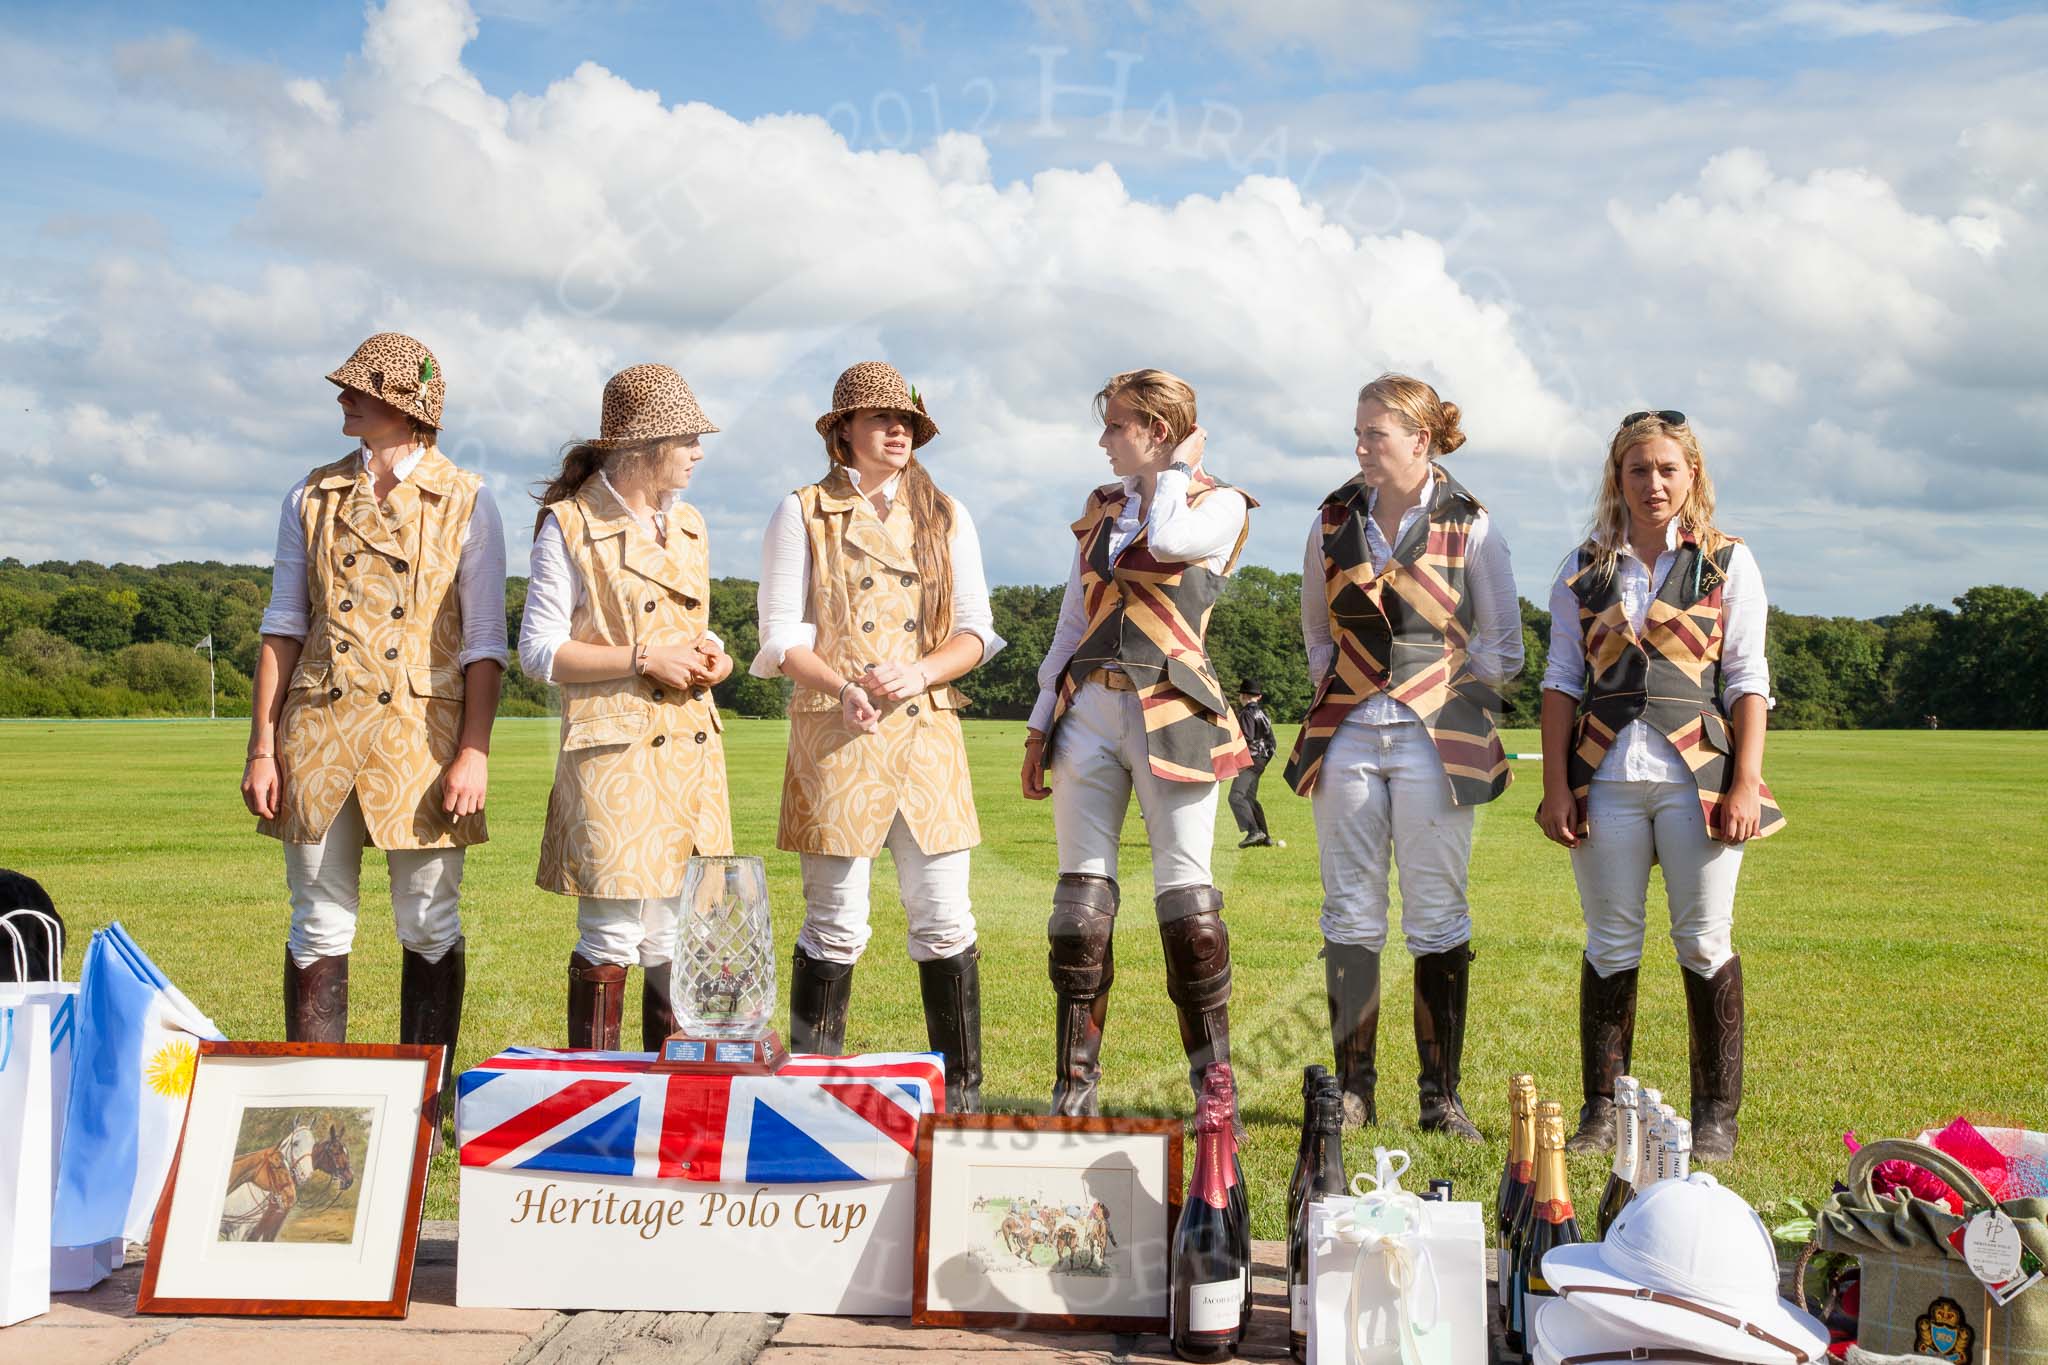 7th Heritage Polo Cup finals: RUNNERS UP - The AMAZONS of POLO sponsored by Polistas, Sheena Robertson, Emma Boers, Heloise Lorentzen, v WINNERS, 
Ladies of the British Empire Liberty Freedom, 
Leigh Fisher, Sarah Wisman, Charlie Howel..
Hurtwood Park Polo Club,
Ewhurst Green,
Surrey,
United Kingdom,
on 05 August 2012 at 16:55, image #237